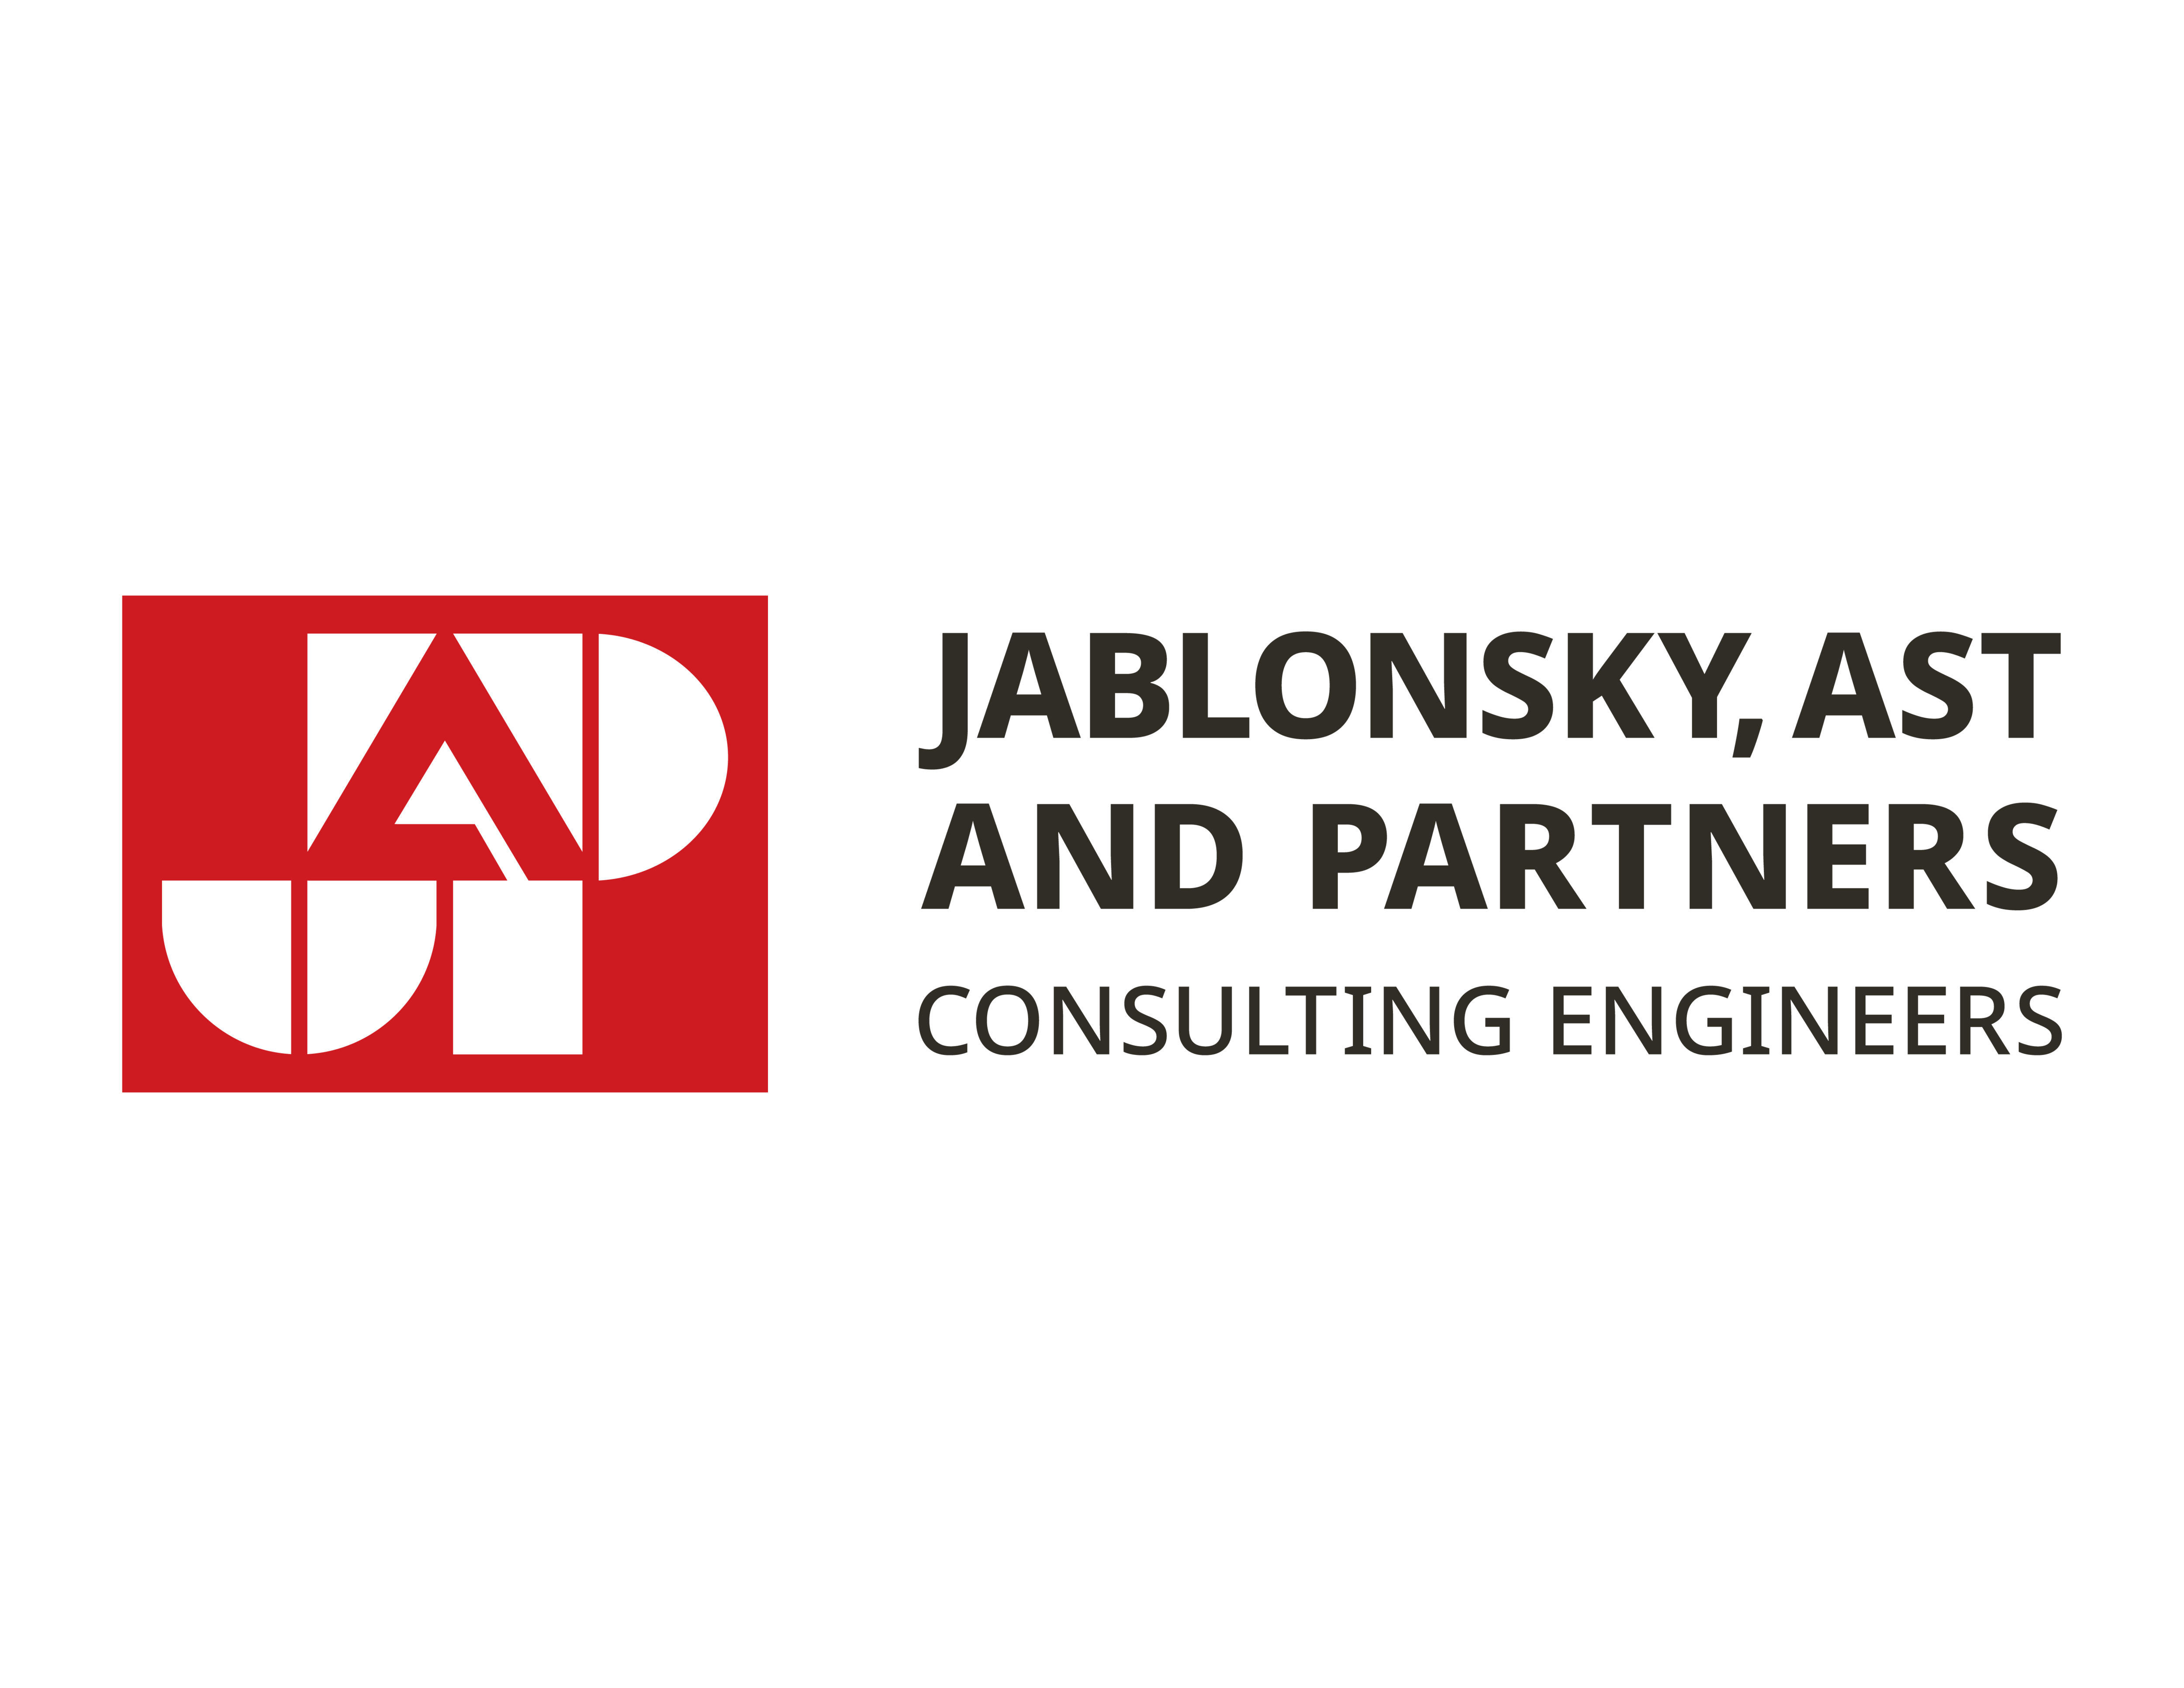 Jablonsky, Ast and Partners